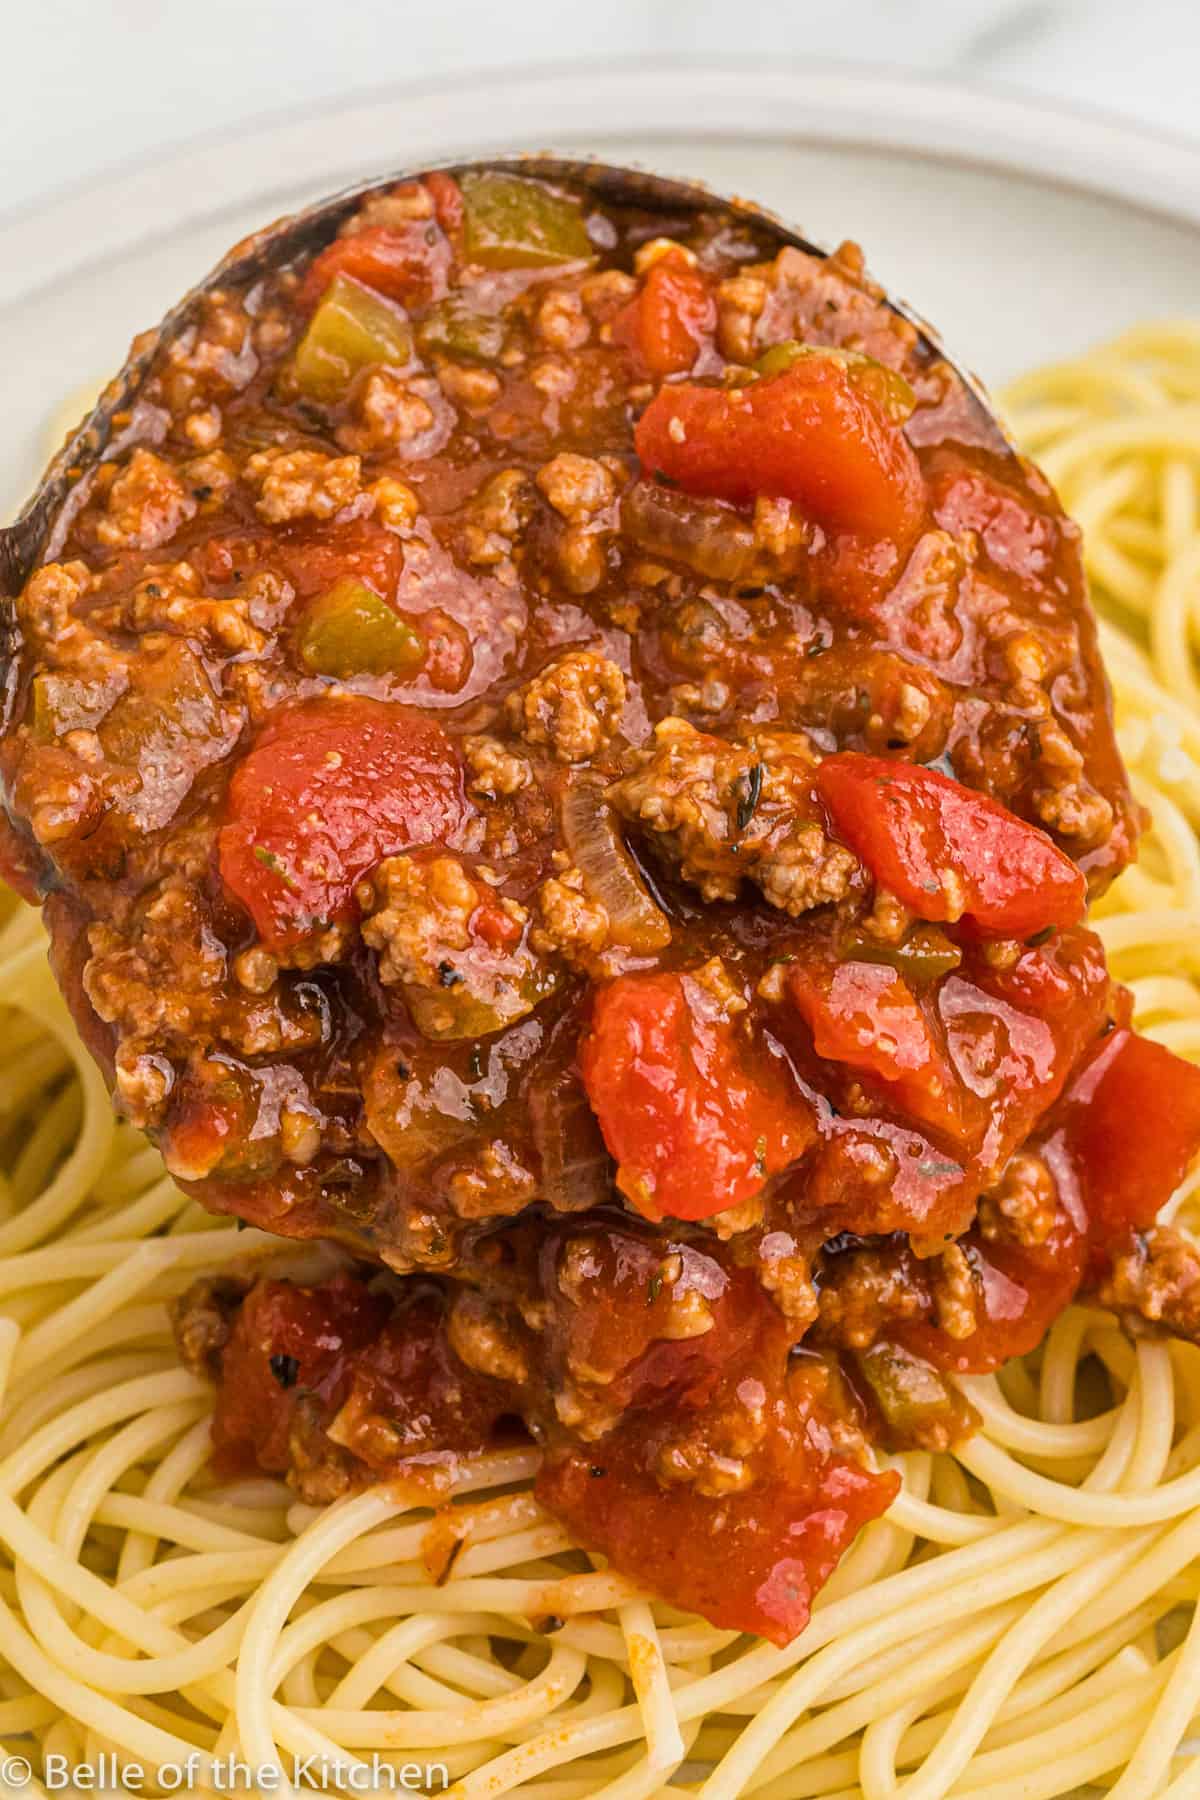 spaghetti sauce spooned over noodles.